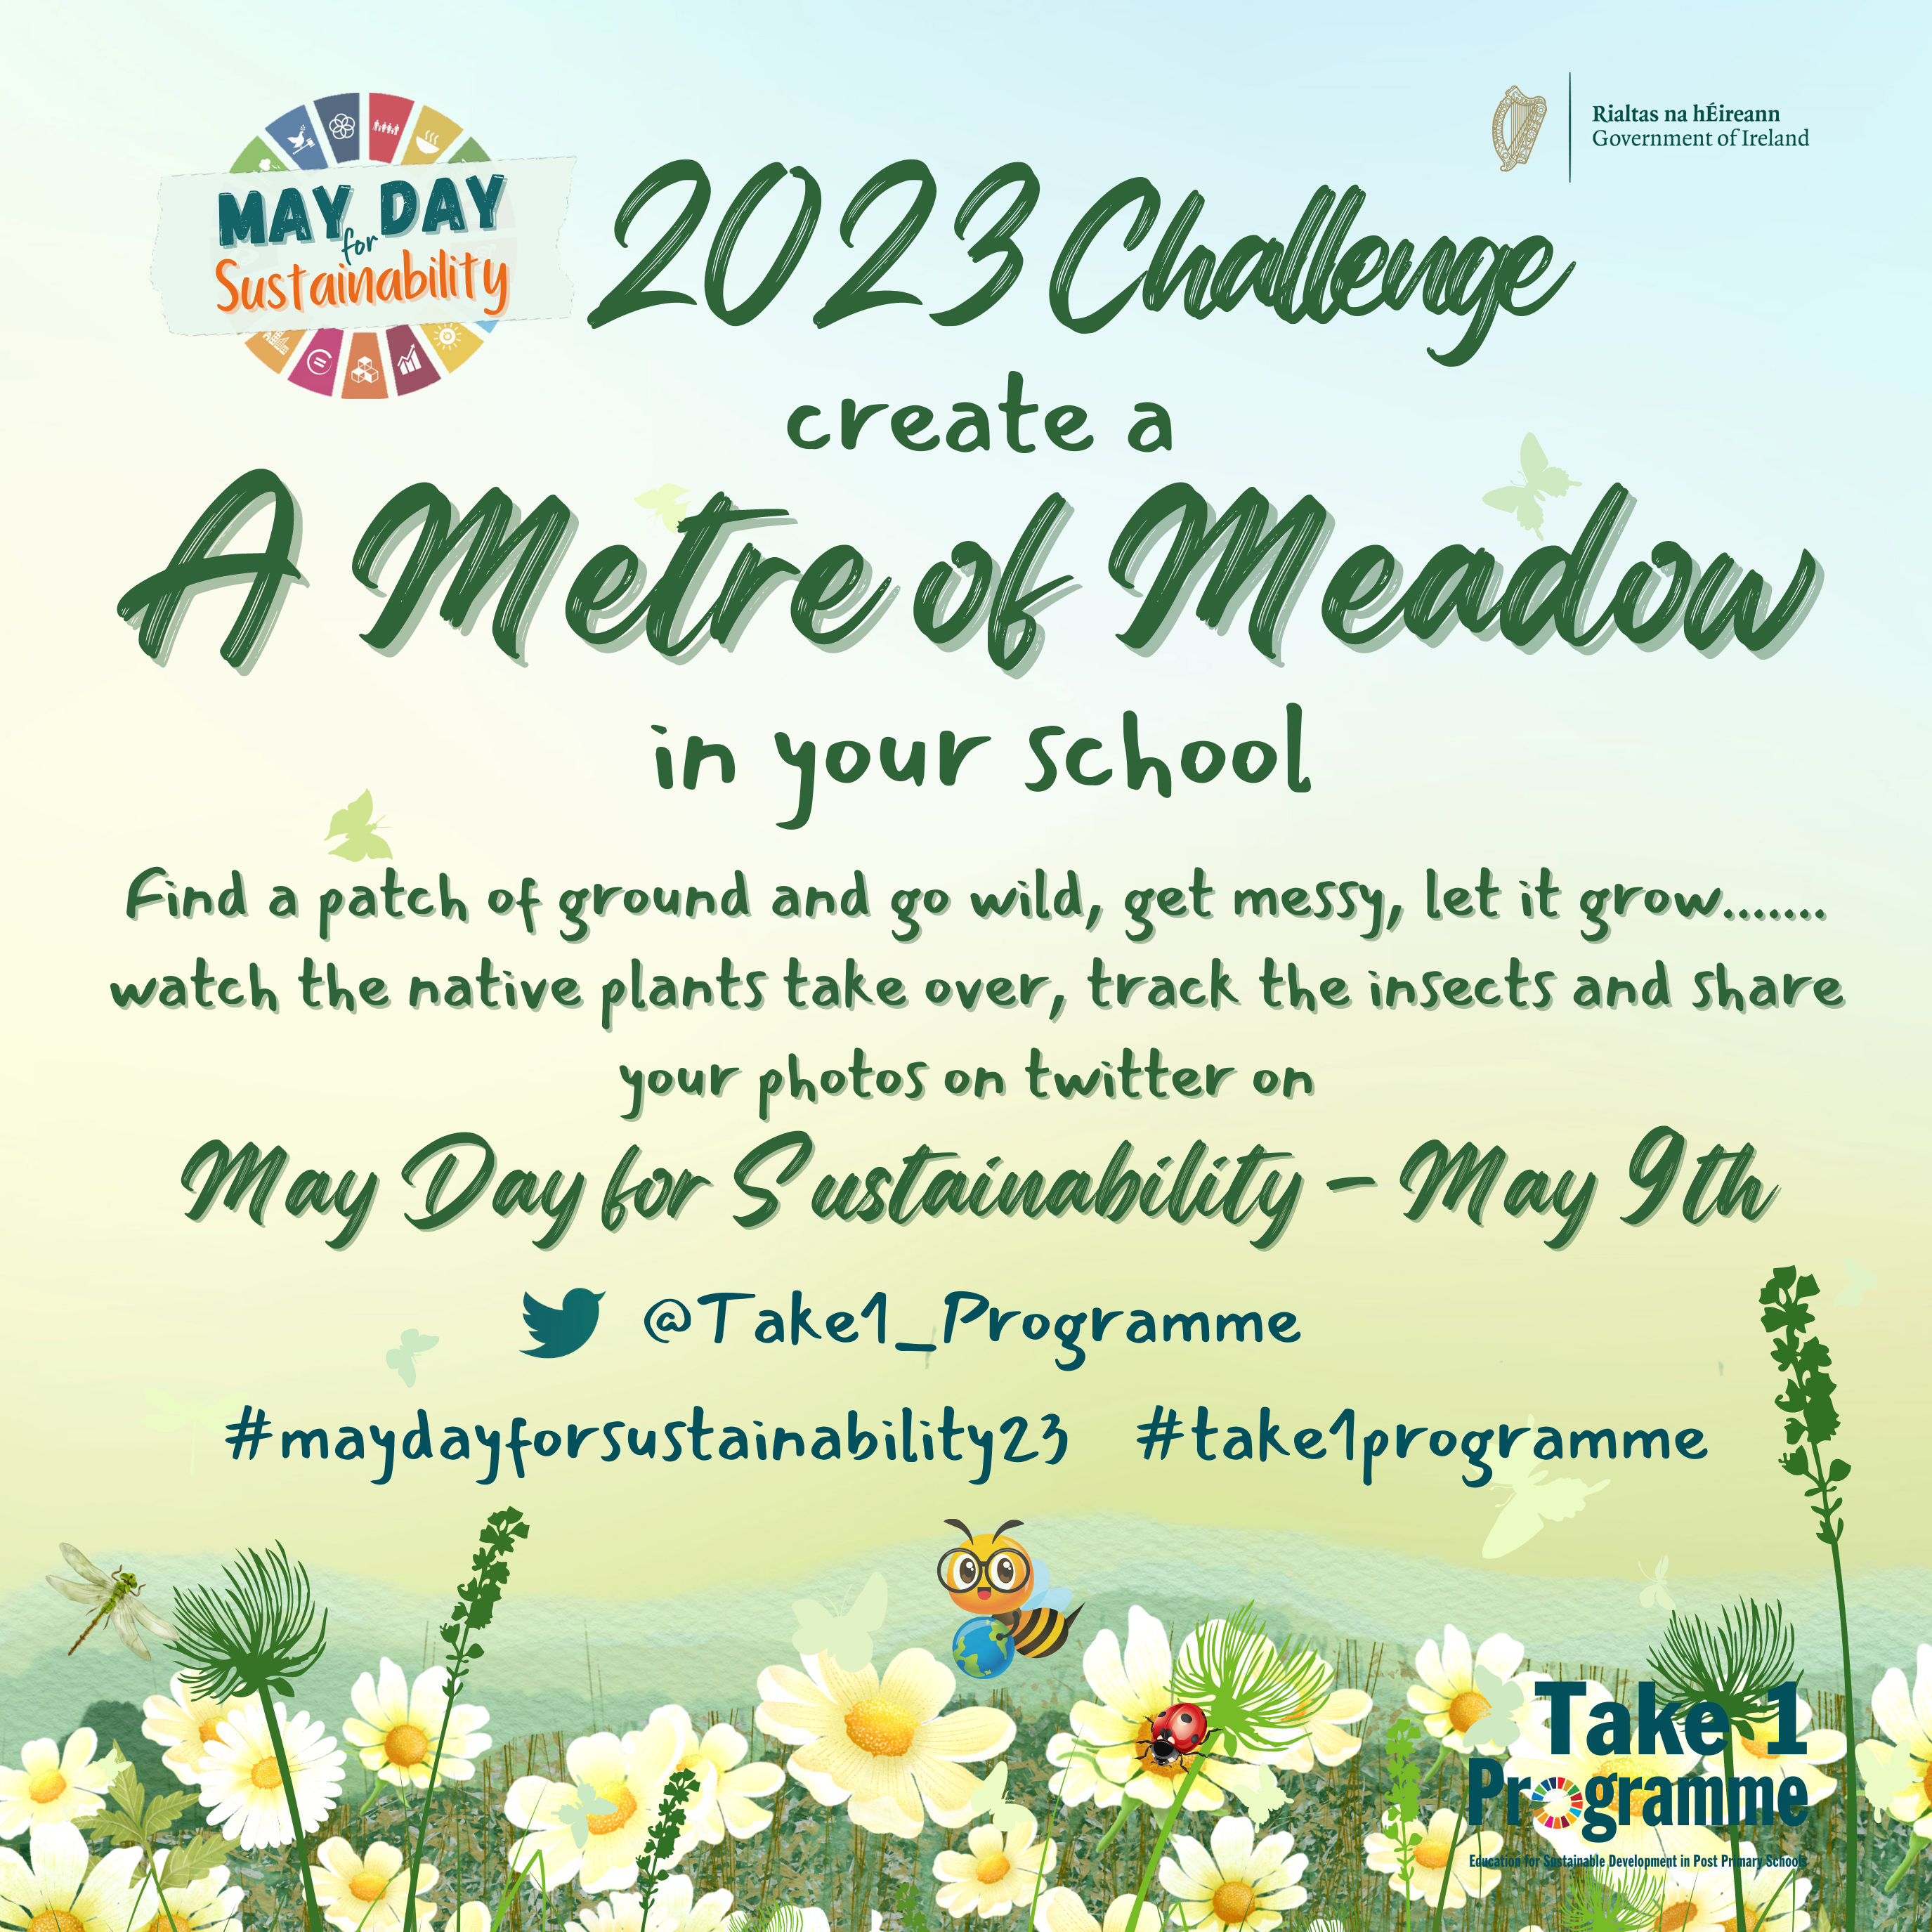 May Day 2023 Challenge - Asking schools to create 1 Metre of Meadow and track biodiversity and learn about SDG 15